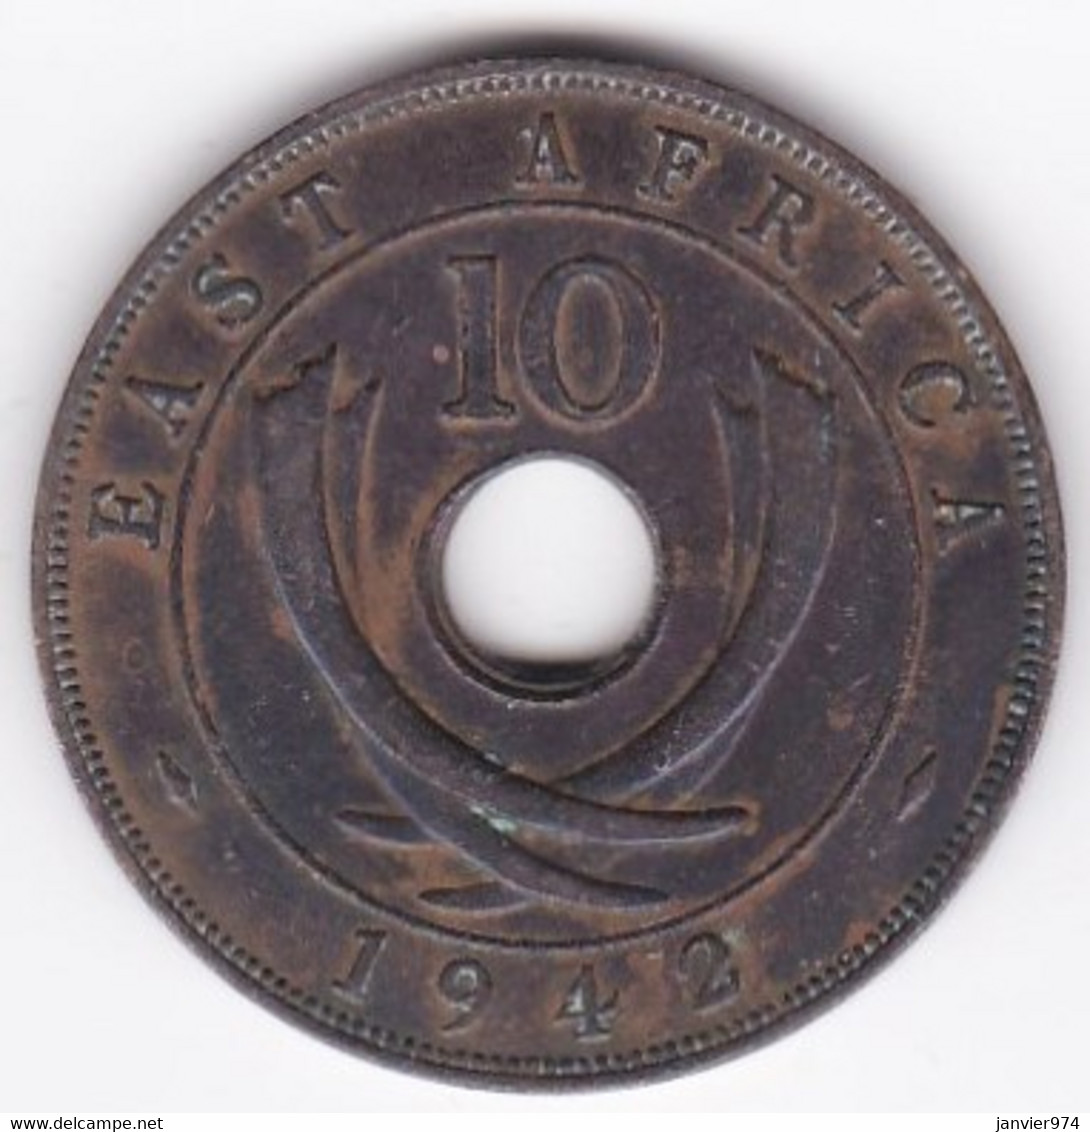 East Africa 10 Cents 1942  George VI, En Bronze , KM# 26 - Colonia Británica